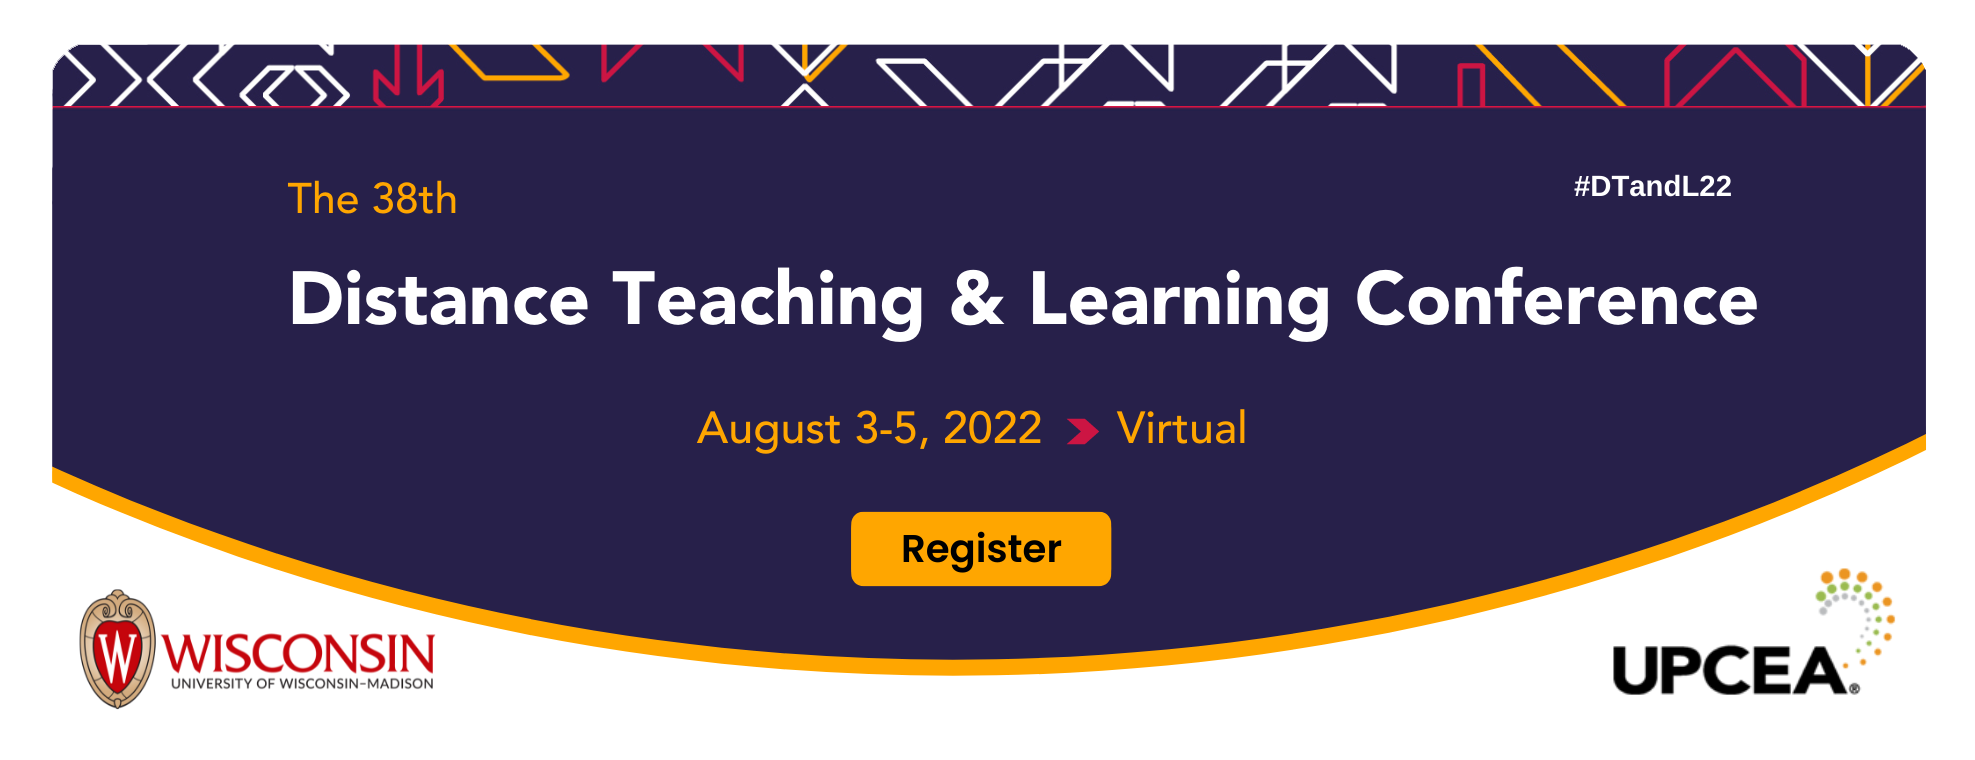 2022 Distance Teaching & Learning Conference | August 3-5, 2022 | Virtual Event